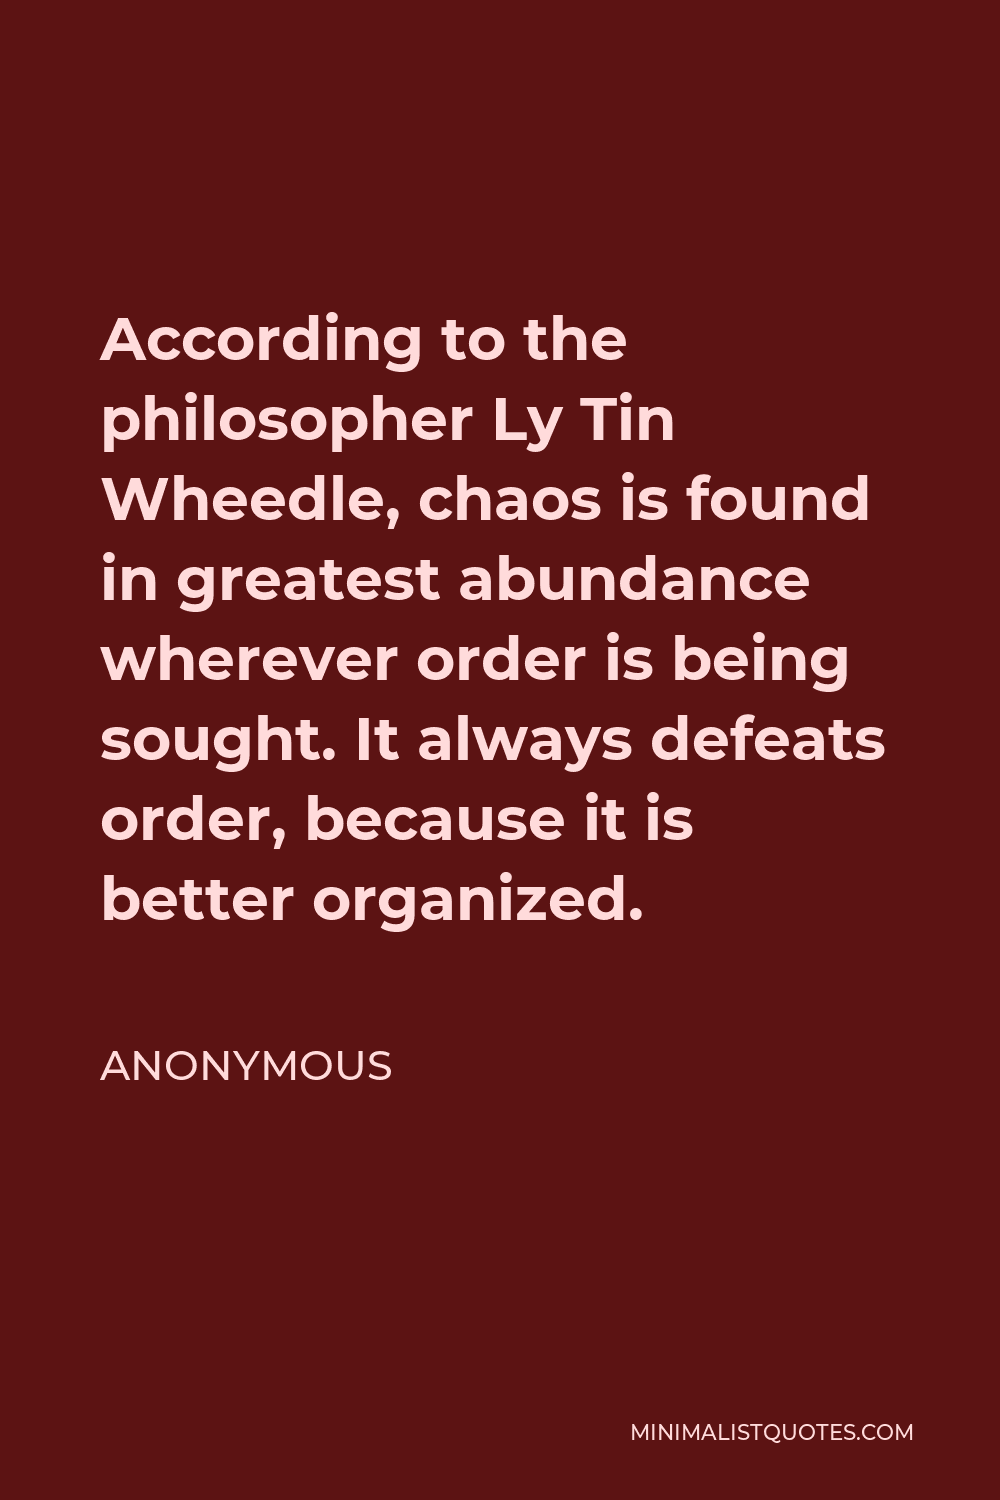 Anonymous Quote - According to the philosopher Ly Tin Wheedle, chaos is found in greatest abundance wherever order is being sought. It always defeats order, because it is better organized.